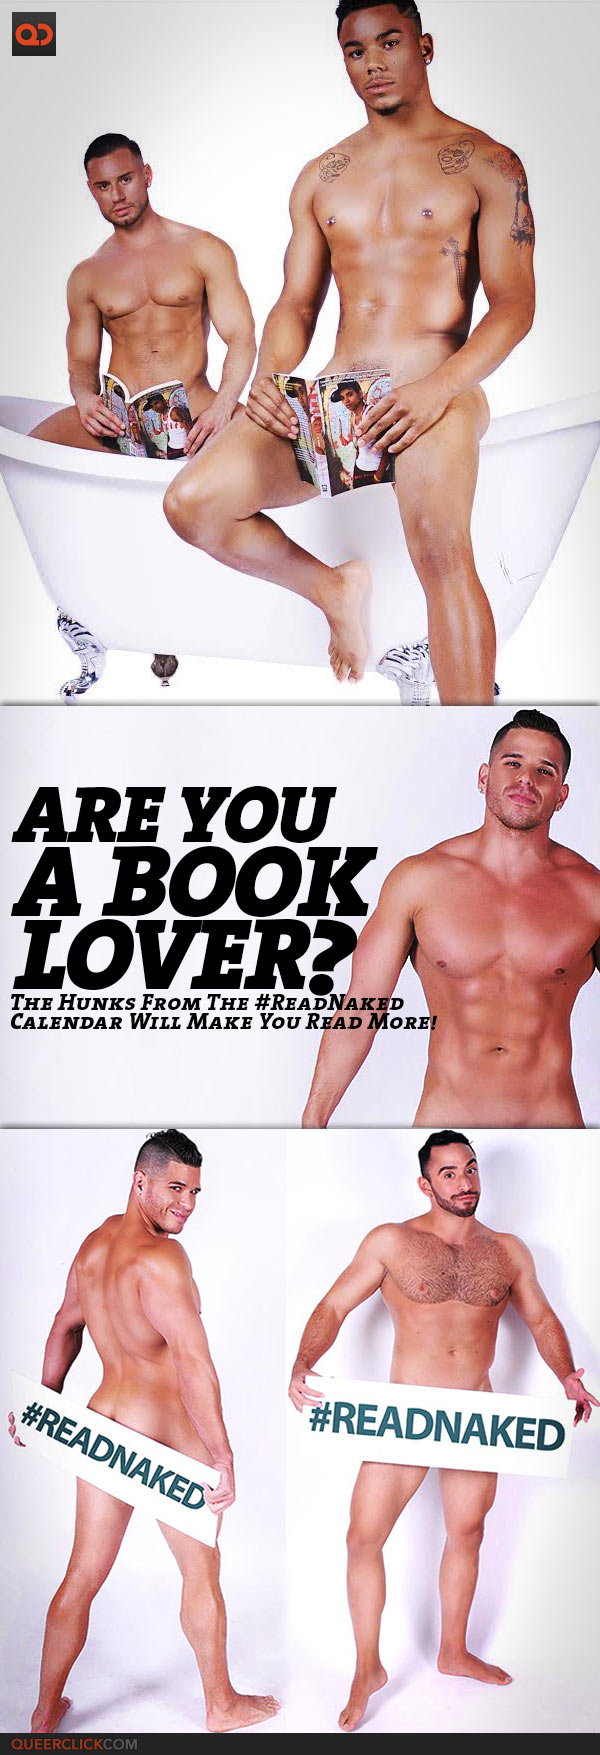 Are You A Book Lover? The Hunks From The #ReadNaked Calendar Will Make You Read More!